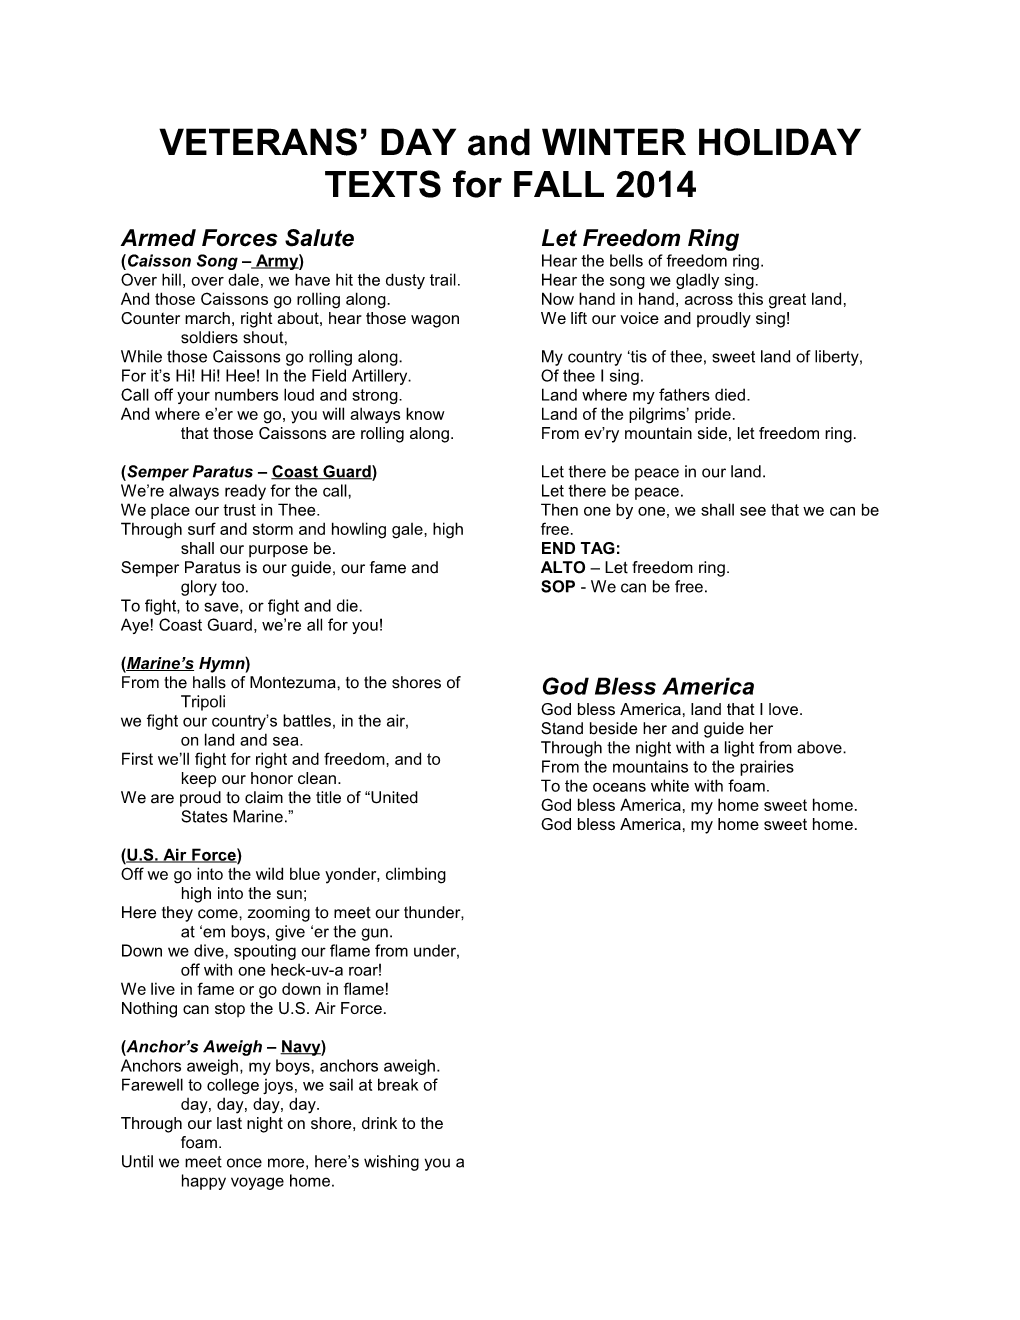 VETERANS DAY and WINTER HOLIDAY TEXTS for FALL 2014